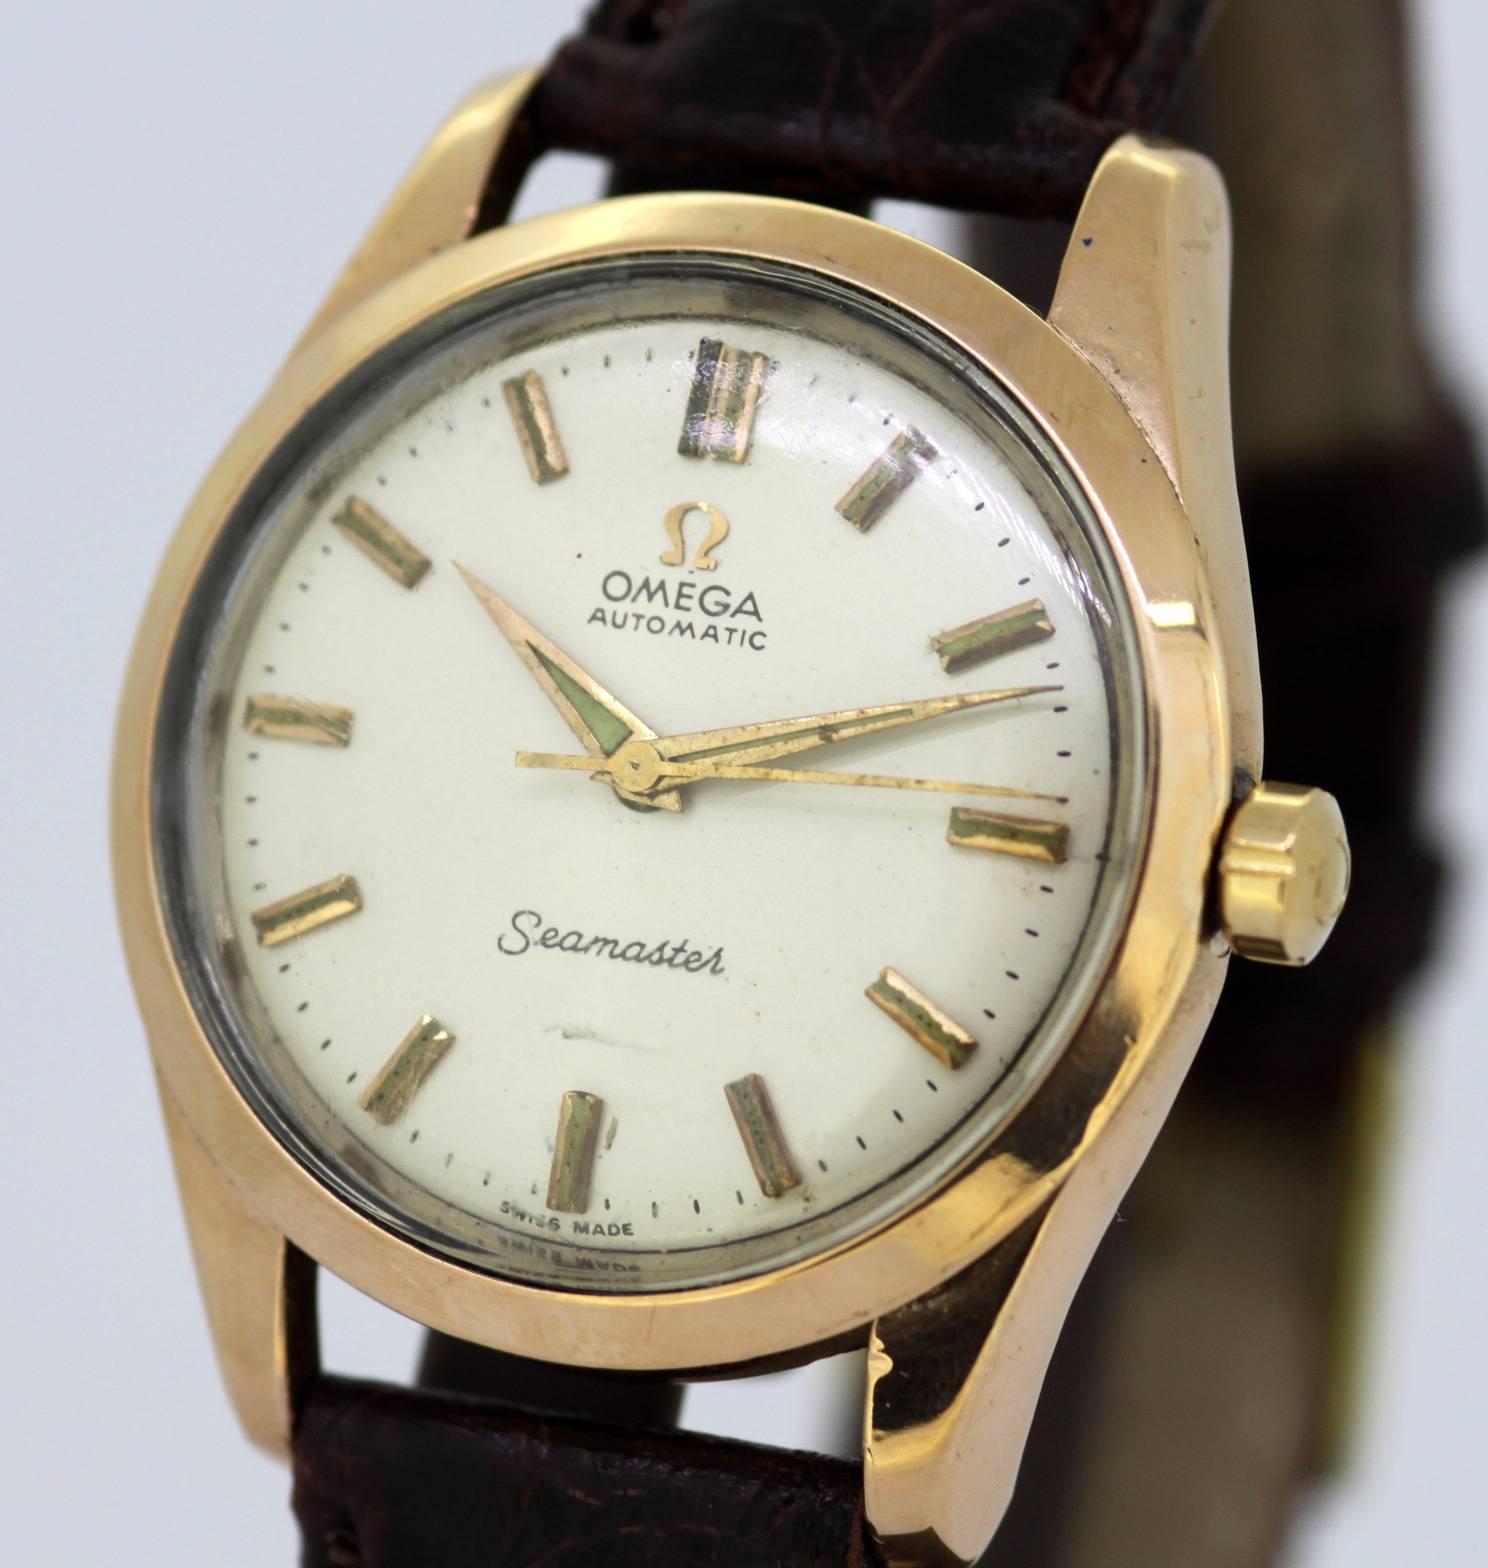 Omega Seamaster - Automatic Wristwatch, 1960's

Gender: Men
Case size (Including Crown): 43 x 38 mm
Movement: Automatic
Watchband Material: Leather Strap with Omega Buckle
Case material : Steel and Gold Capped
Display Type:	Analogue	
Dial: ( See